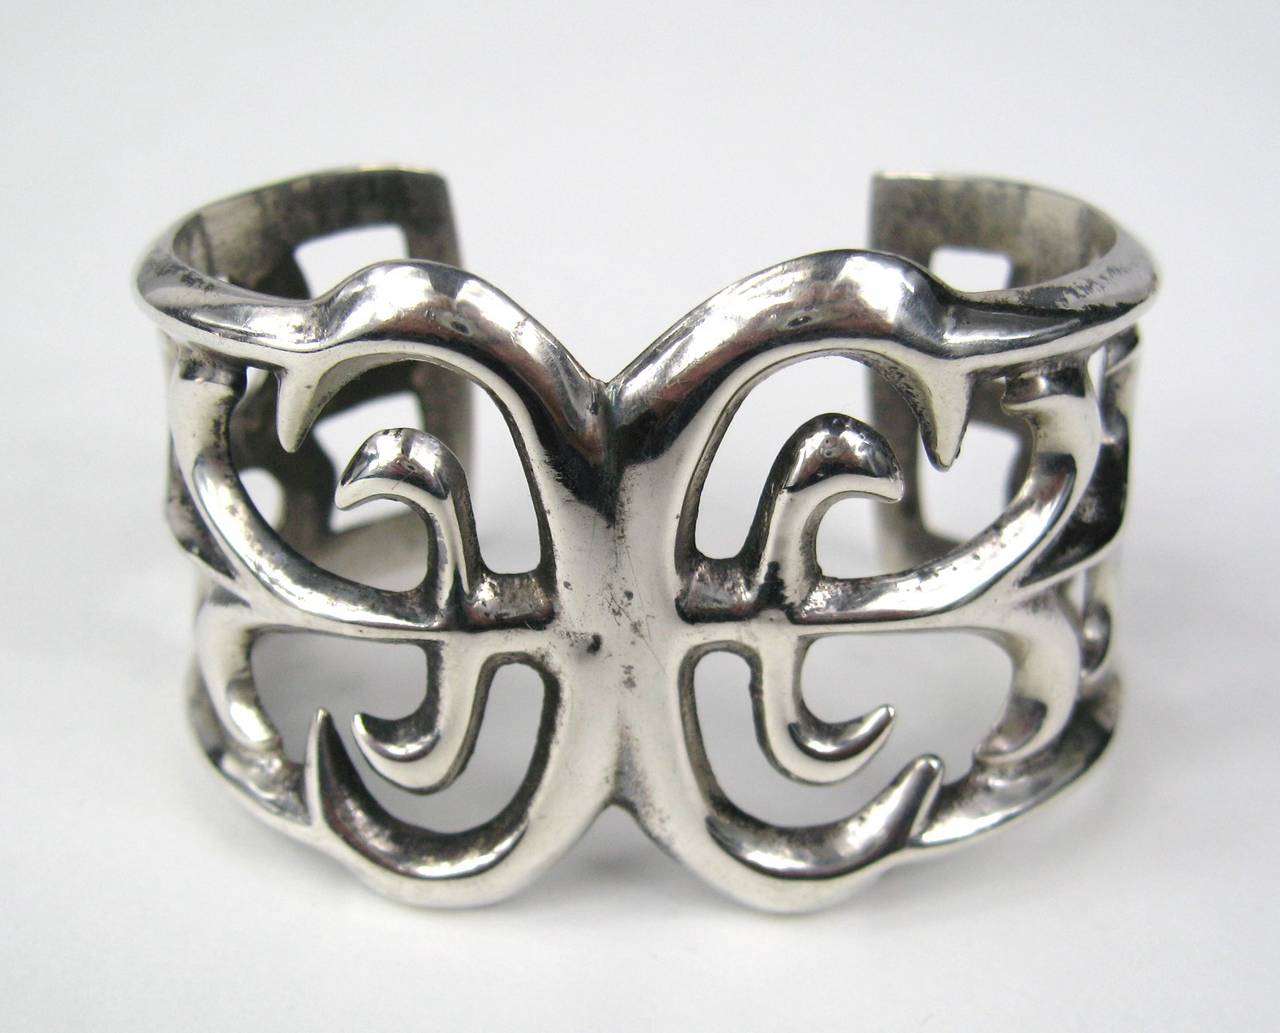 Navajo Sterling Silver sand cast cuff bracelet.

The bracelet is not signed as it is common
for older pieces from the pre 1950 era.
Furthermore it has a great patina and is in
perfect condition
Measures 1.67